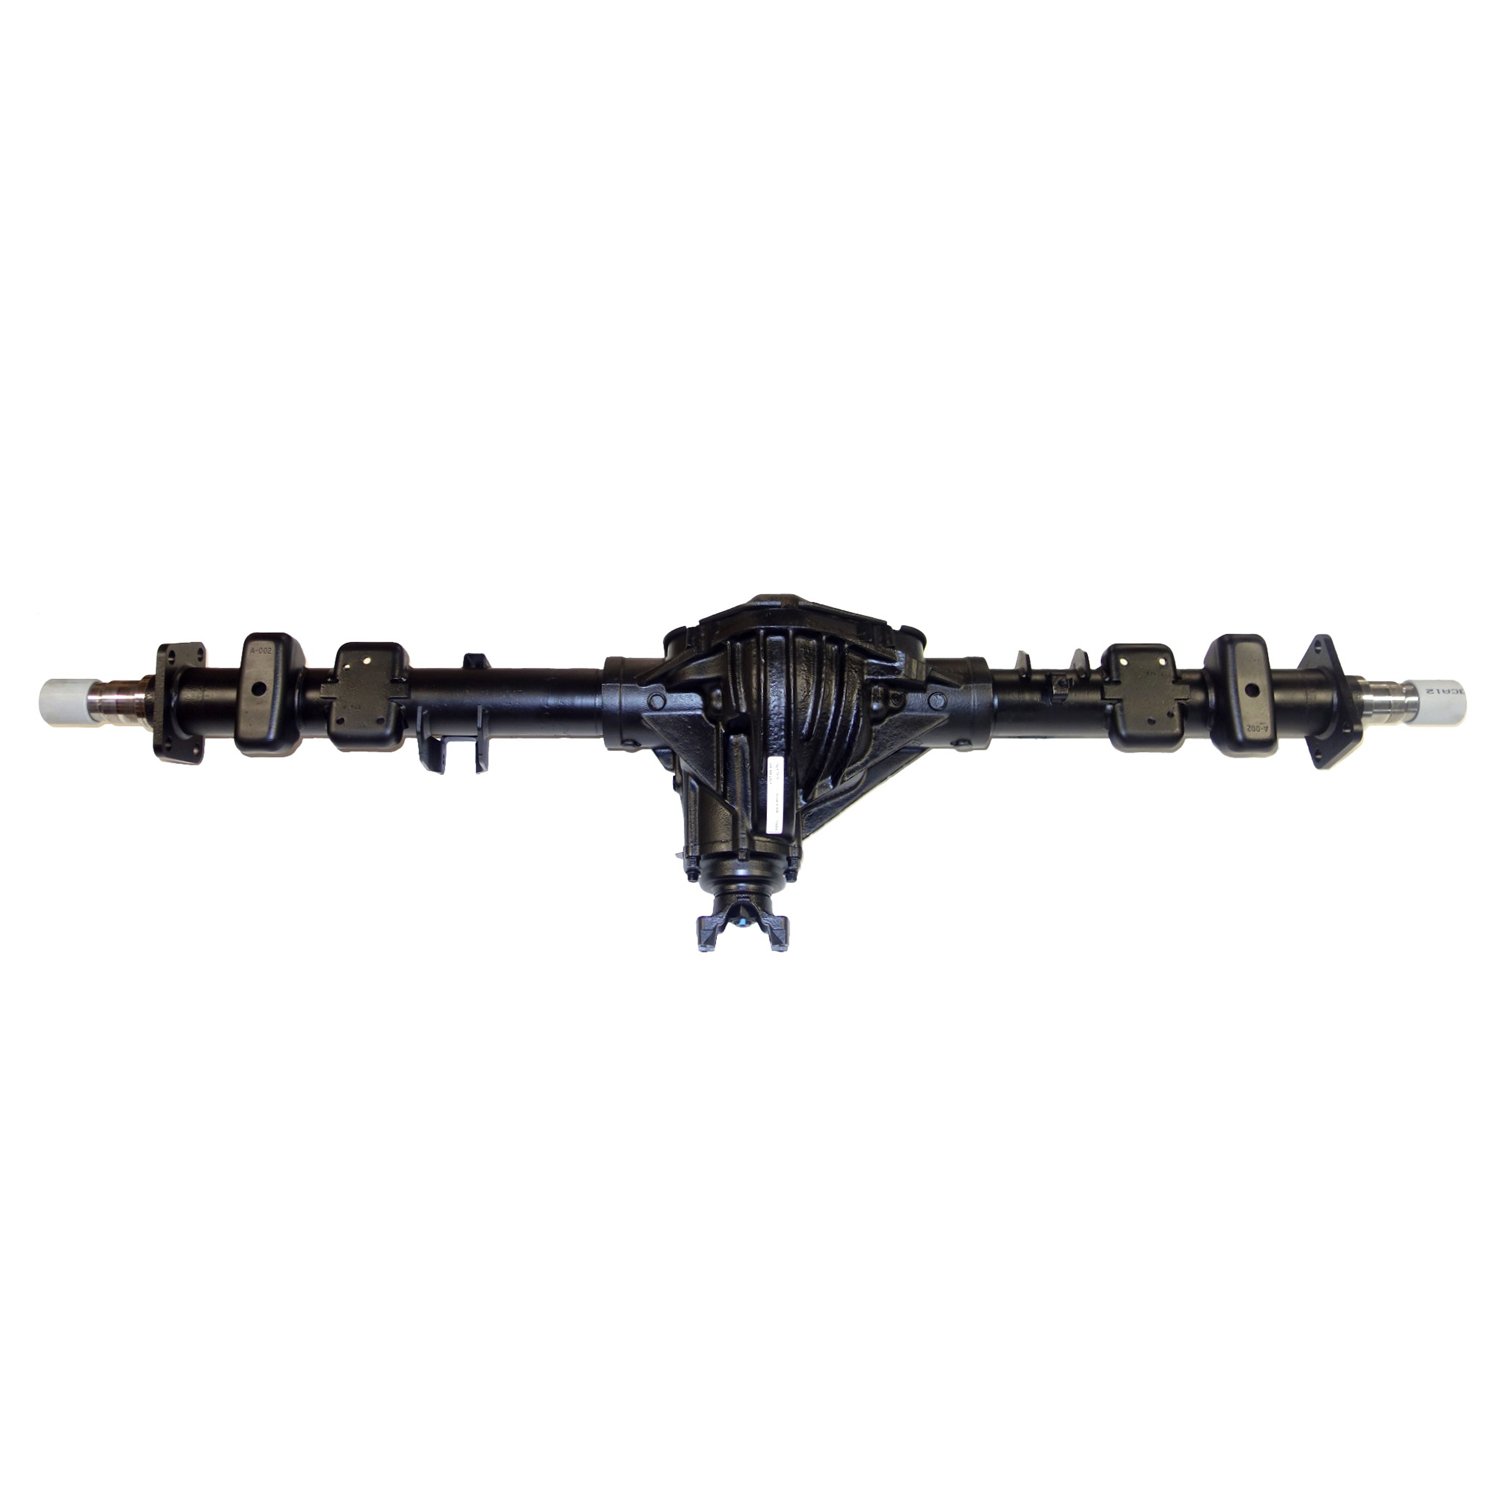 Remanufactured Complete Axle Assembly for GM 14 Bolt Truck 01-05 GM 2500 3.73 , Posi LSD